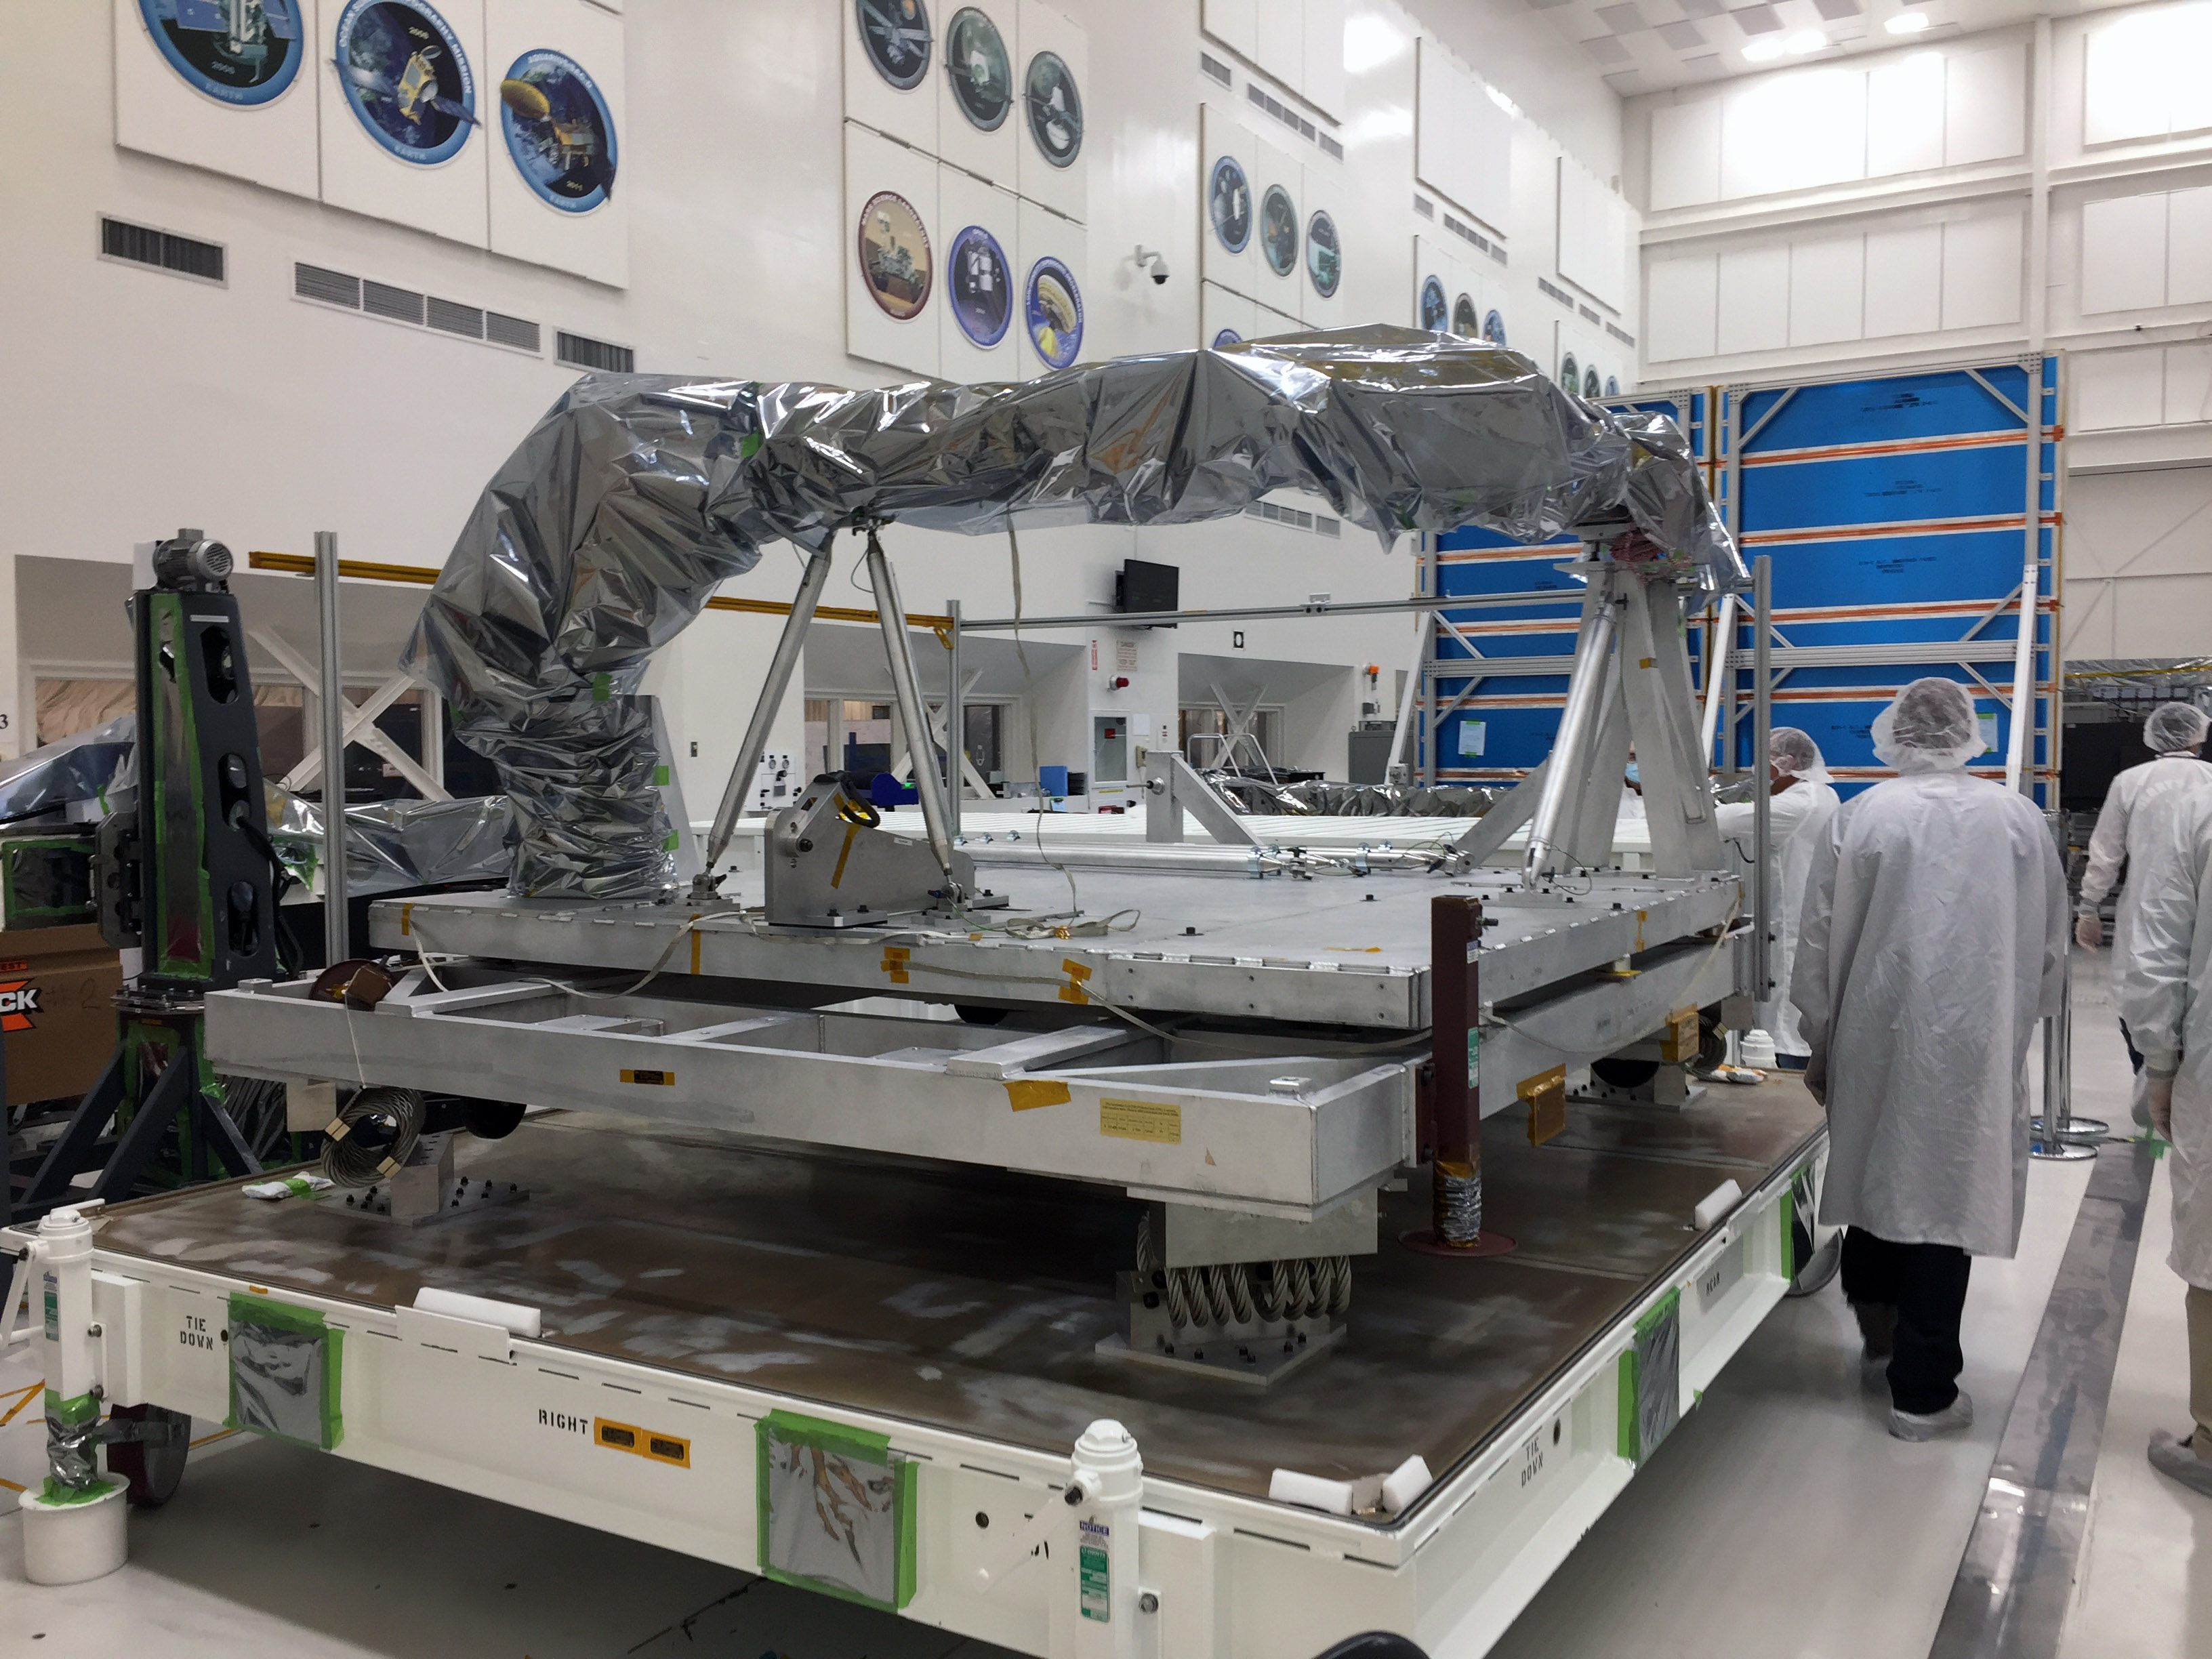 Uncovering NISAR's upper antenna boom assembly at NASA's Jet Propulsion Laboratory.